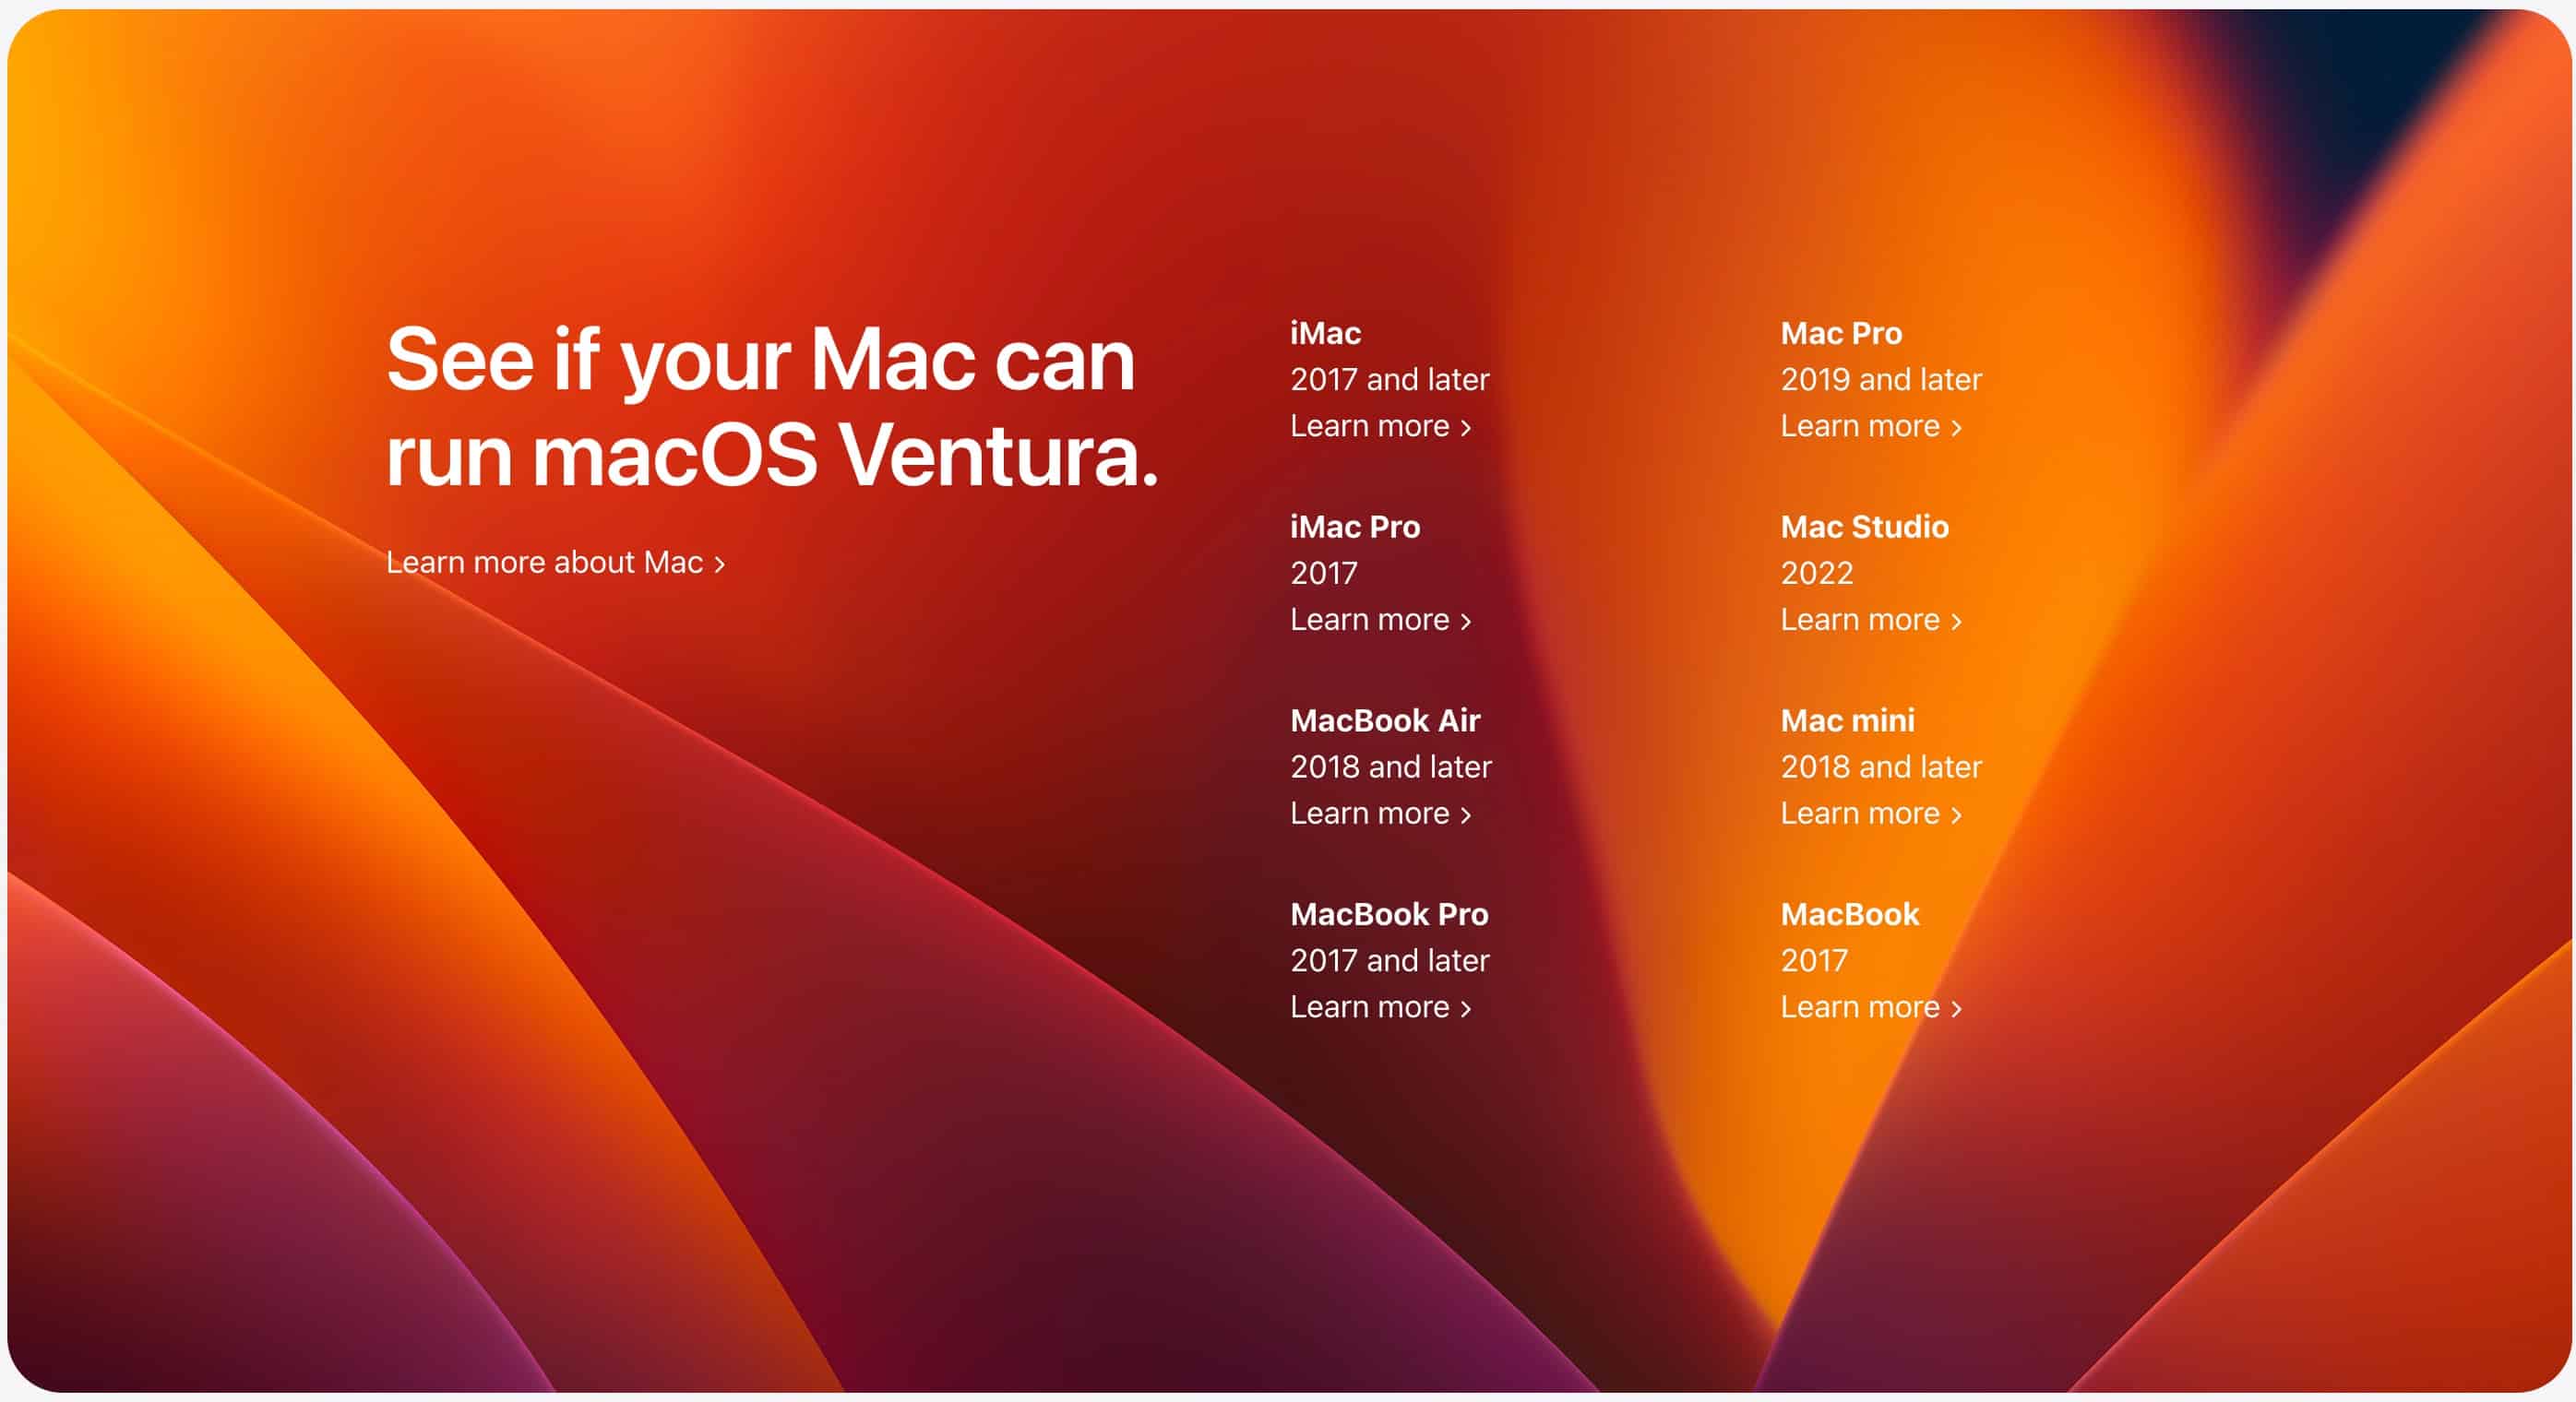 macOS Ventura Compatible Devices - Can I Download and Install macOS Ventura on my Mac?